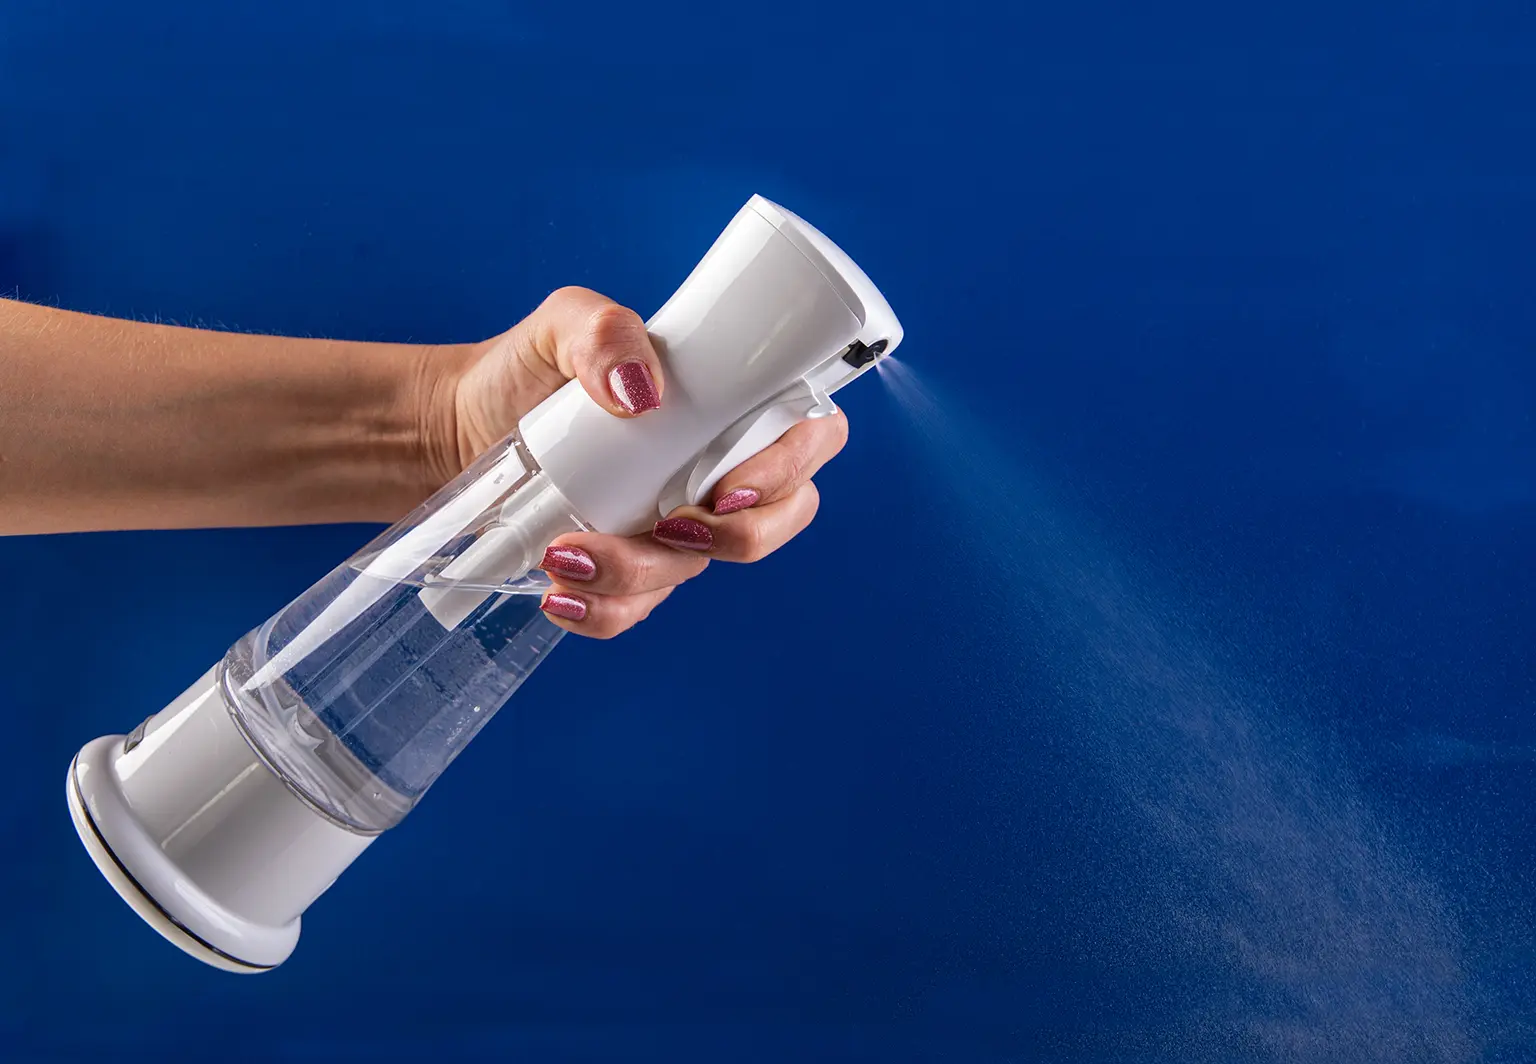 Eco-friendly disinfectant for endless refills